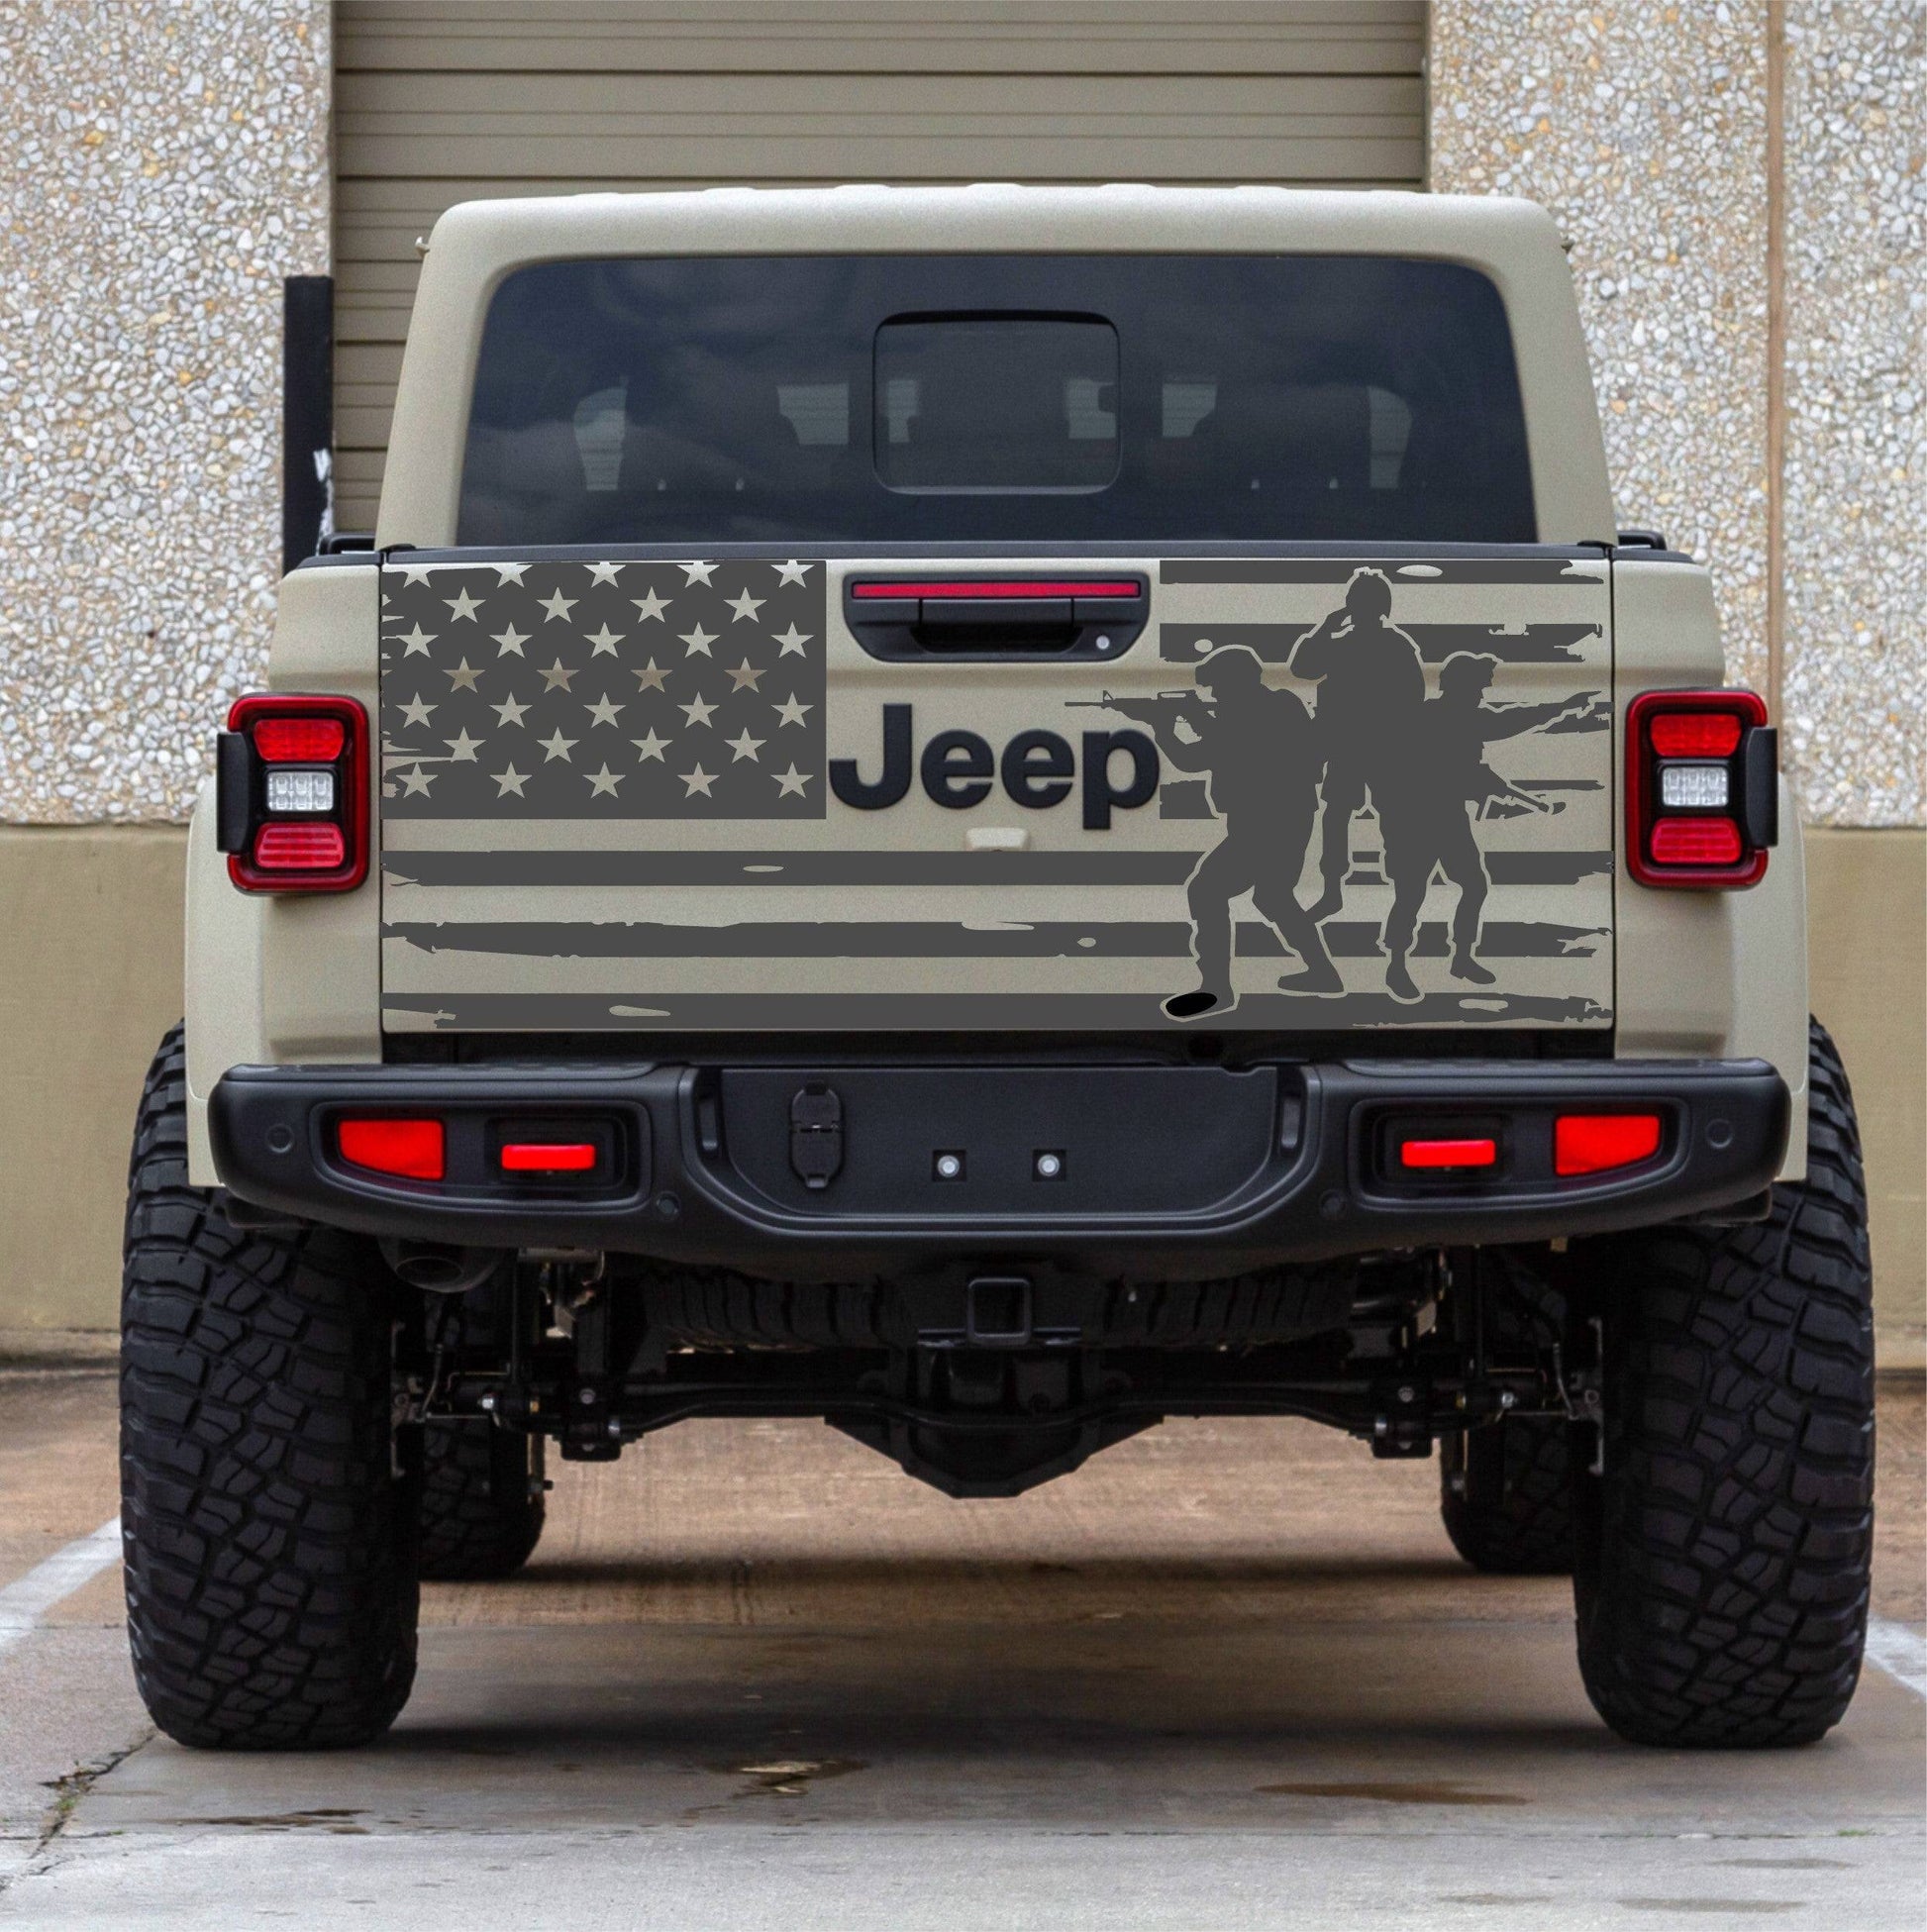 Distressed American Flag Decal Stickers Patriotic Decal Military Appreciation "Thank You For Your Service" Vinyl Decal For Jeep Gladiator Truck Tailgate